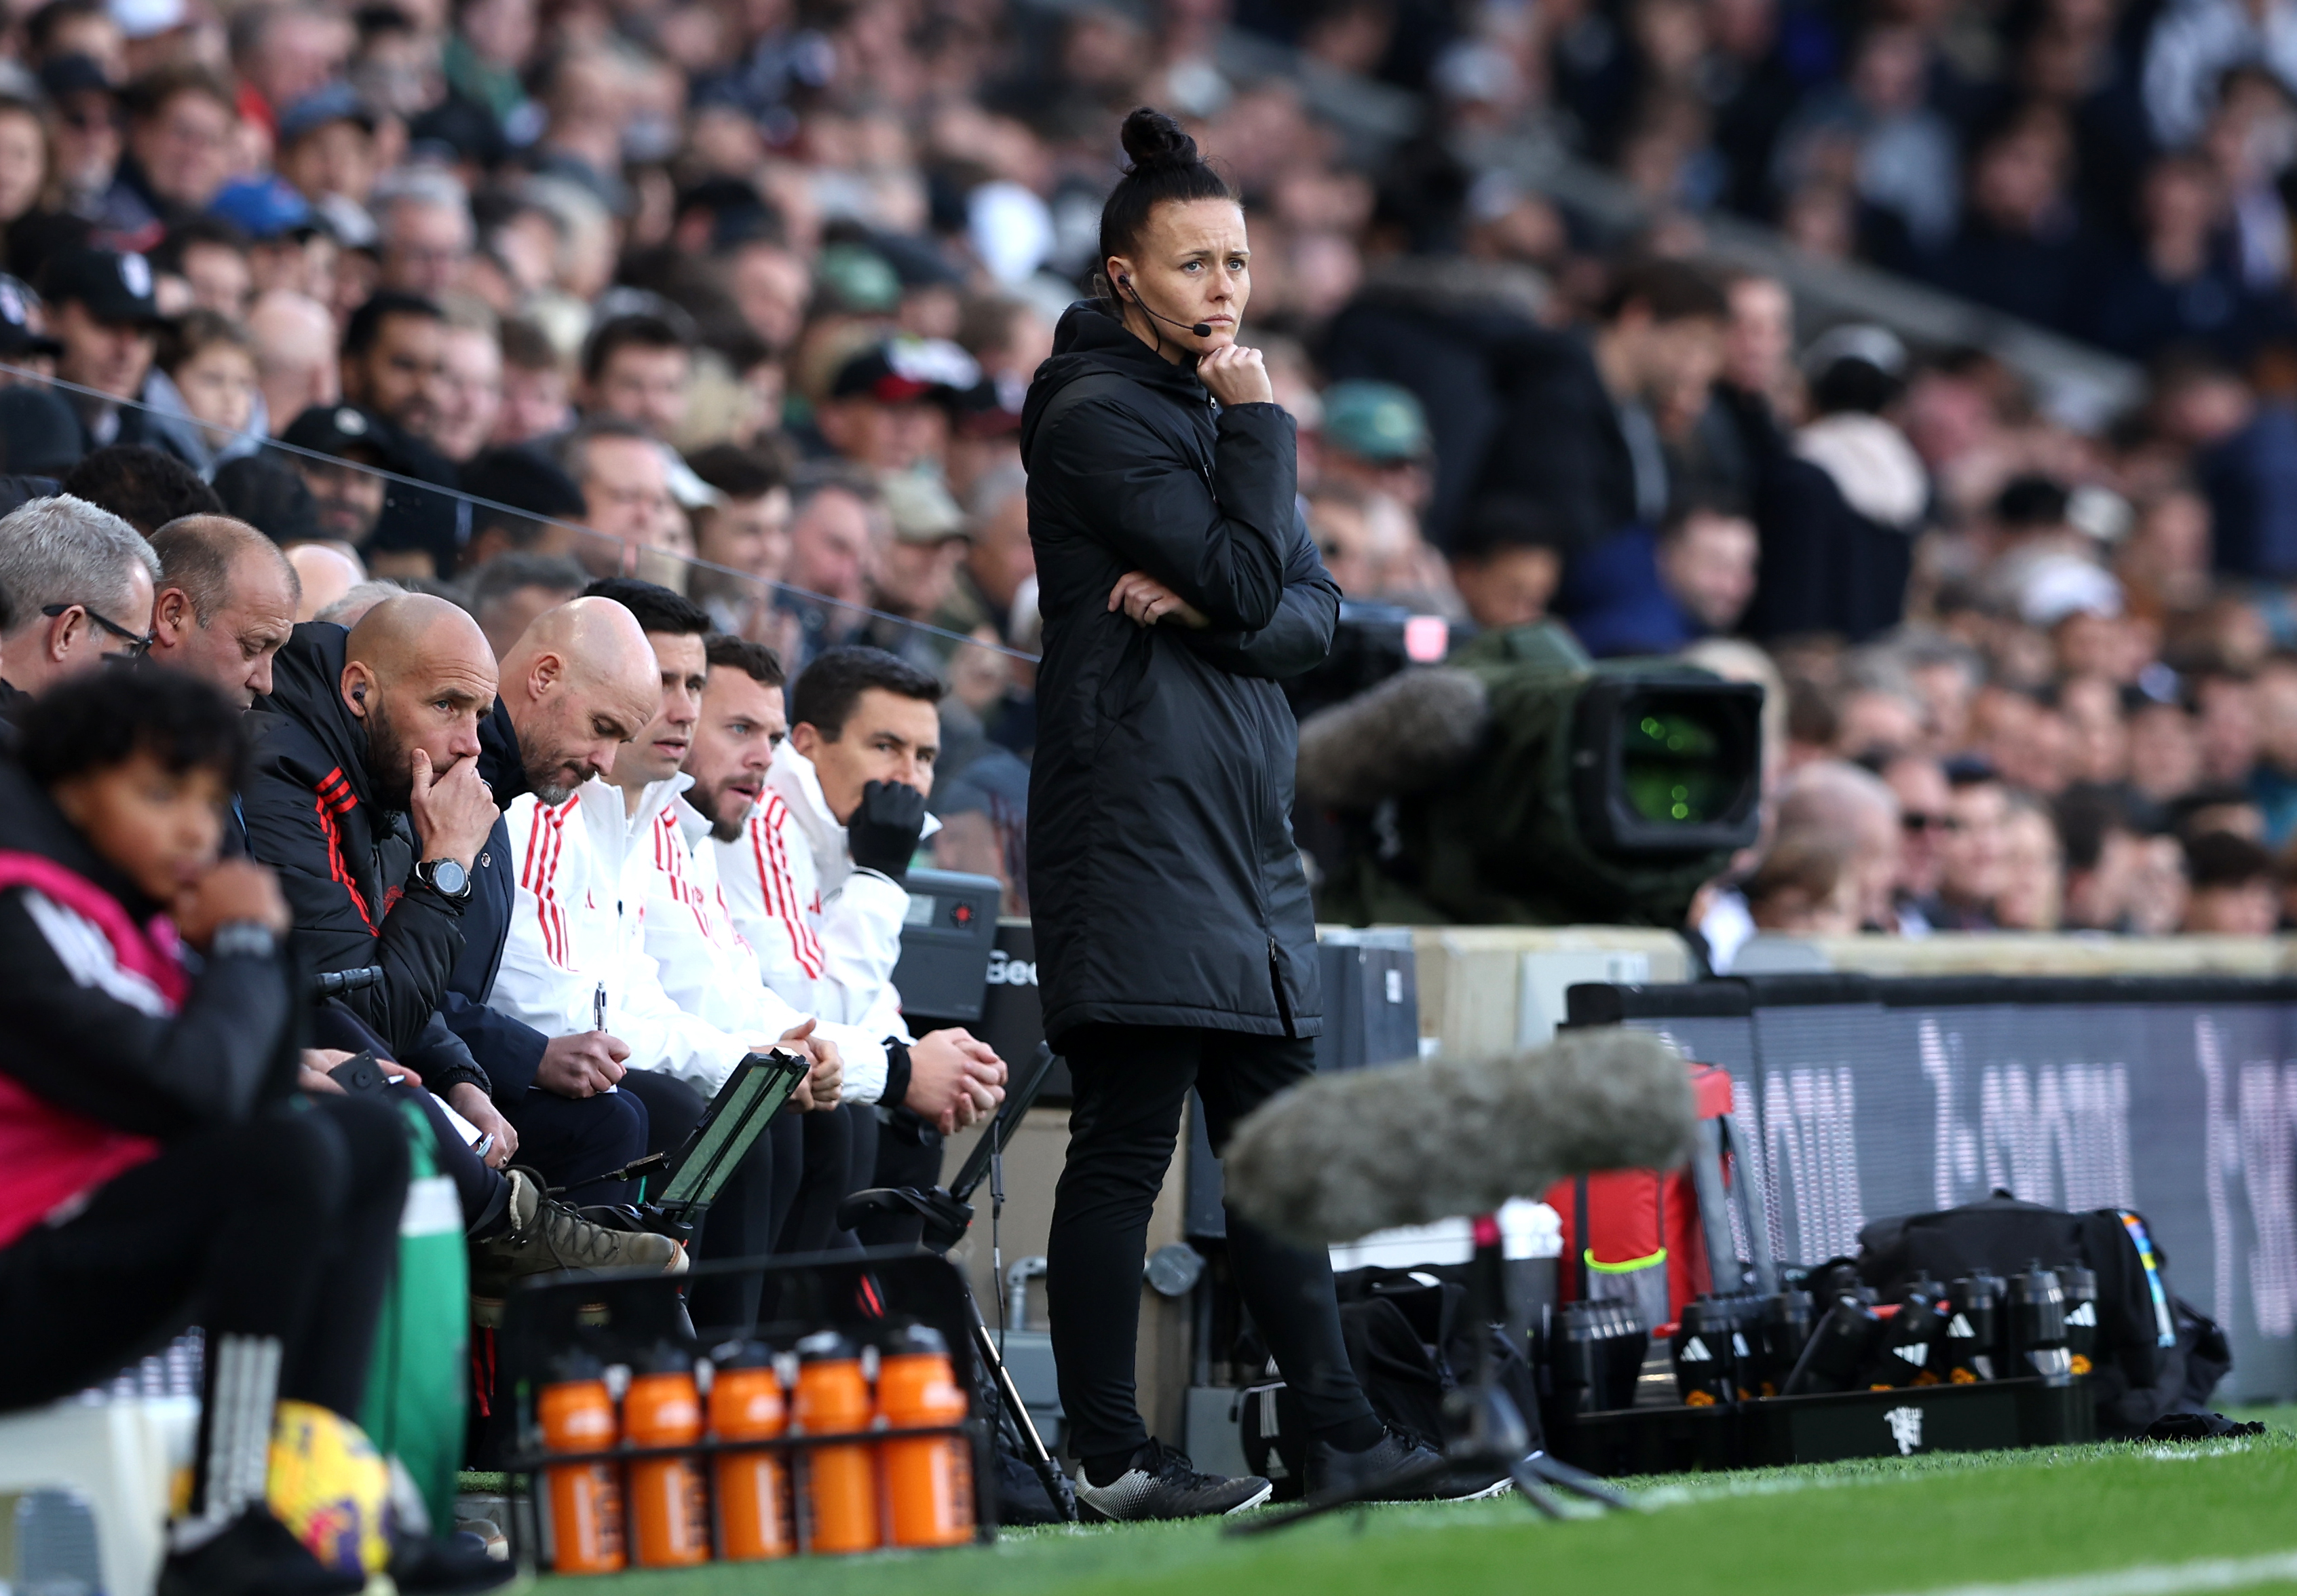 Fourth official Rebecca Welch during a Premier League match at Craven Cottage